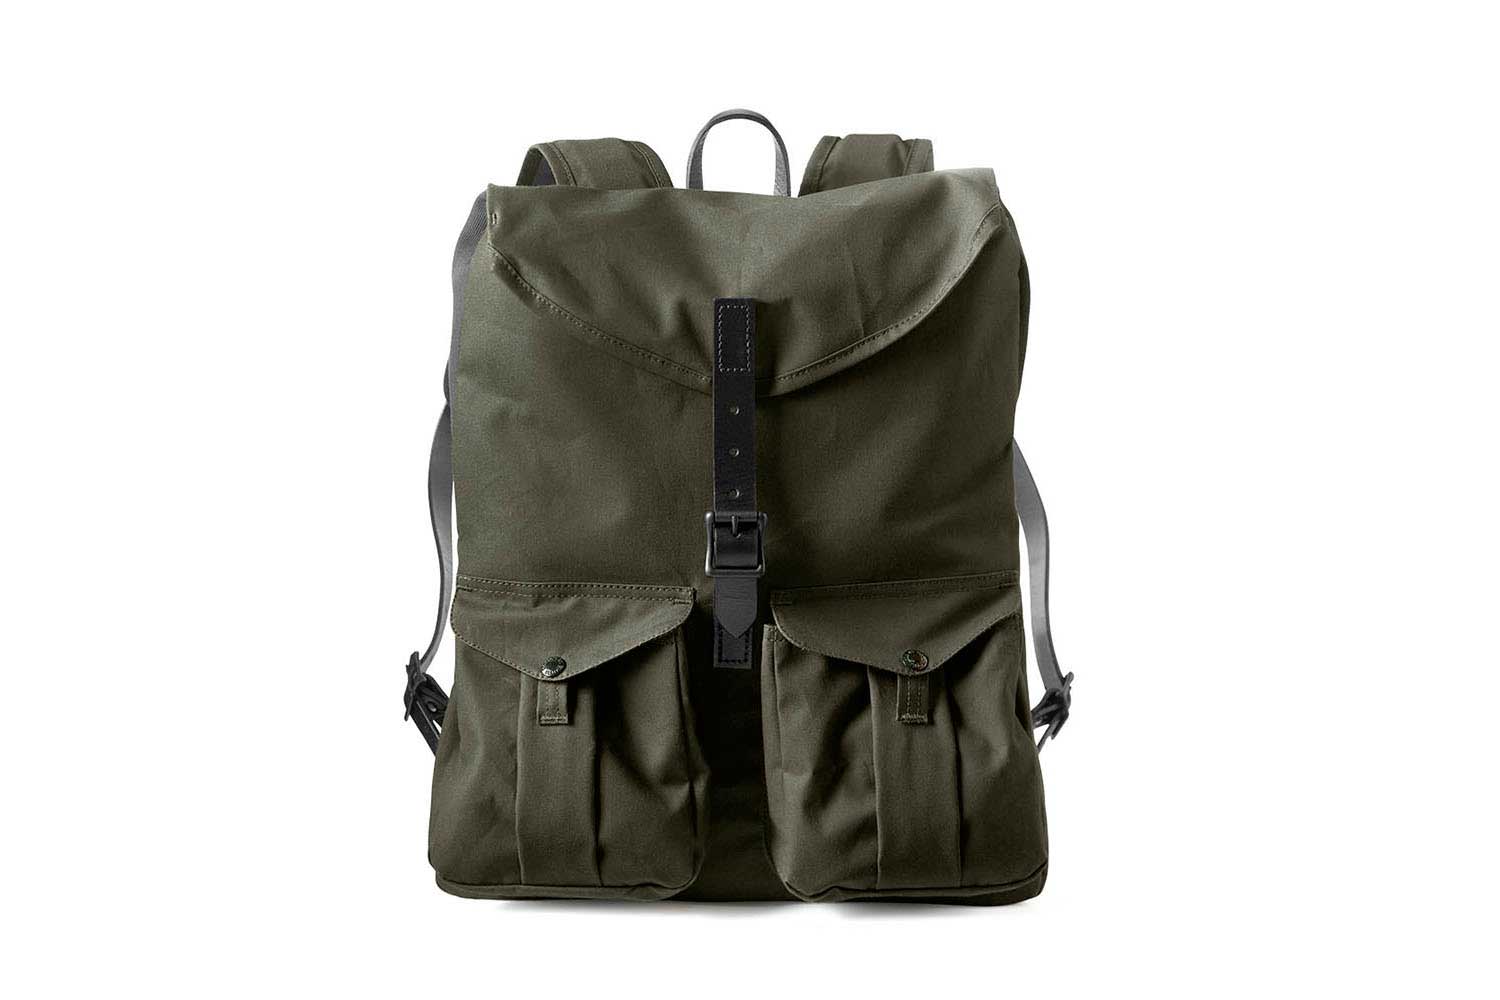 The Harvey Backpack